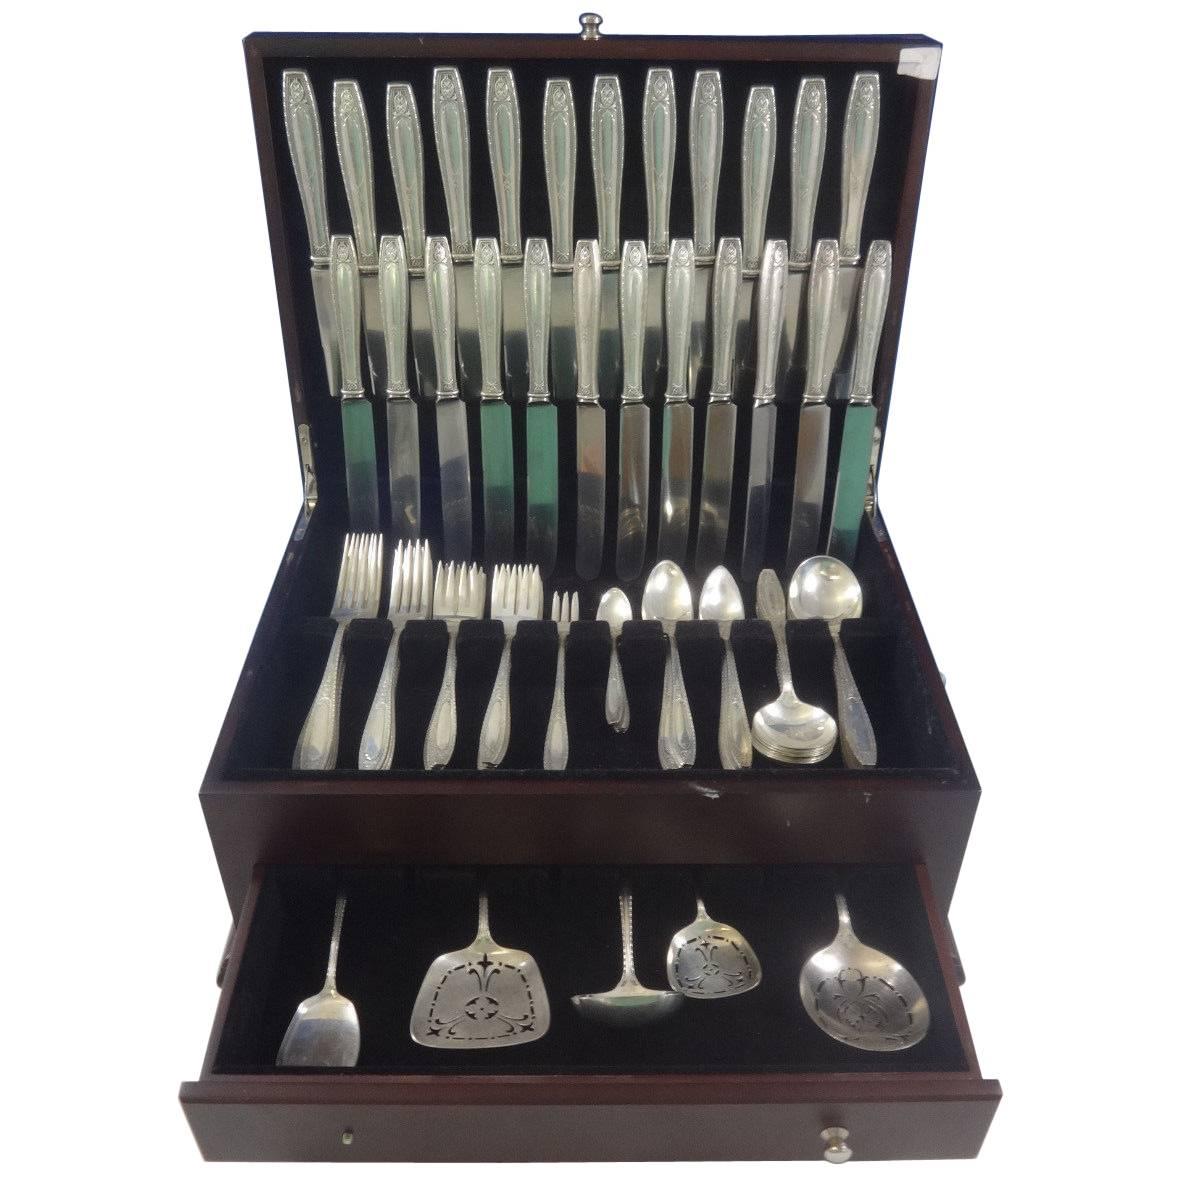 Beautiful large Juliet by Wallace circa 1924 sterling silver flatware dinner and lunch size set of 125 pieces. This set includes:

12 dinner size knives, 9 5/8